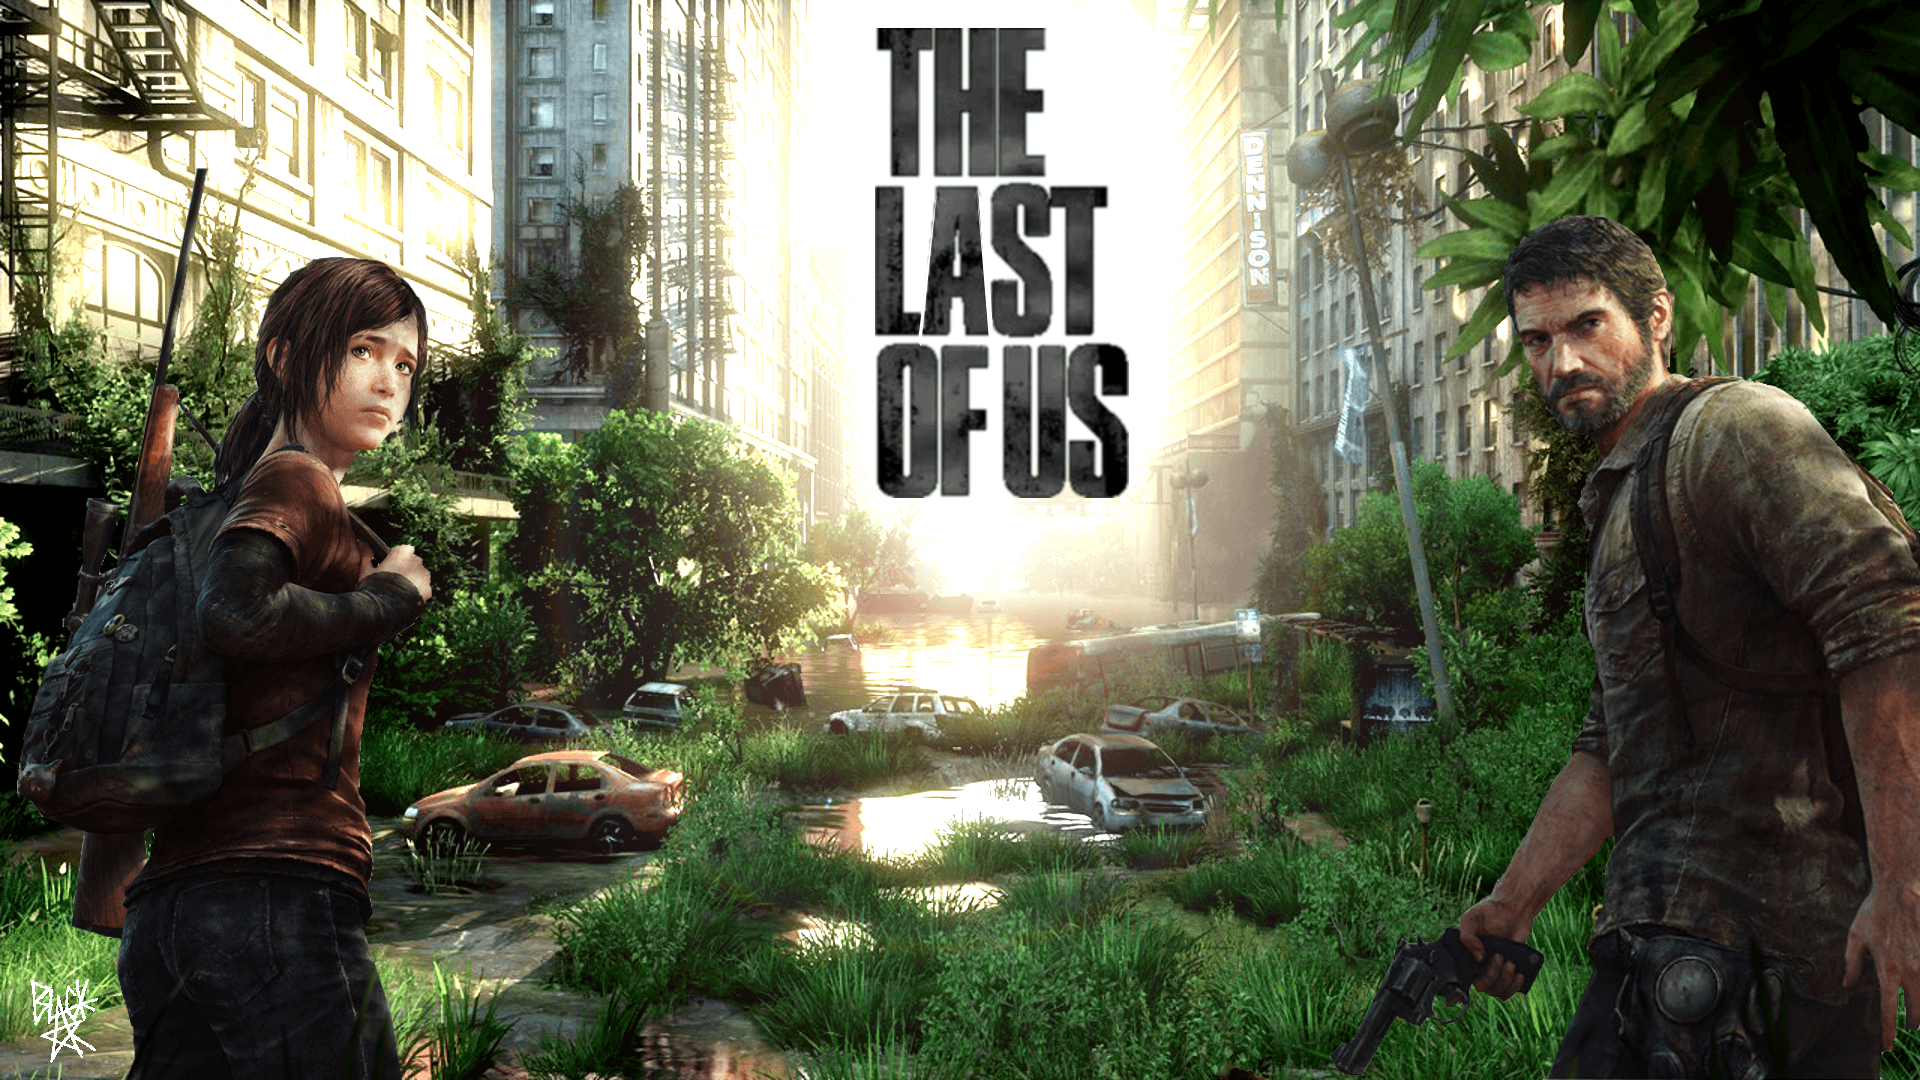 The Last Of Us 1 wallpaper by kevintorrescherry - Download on